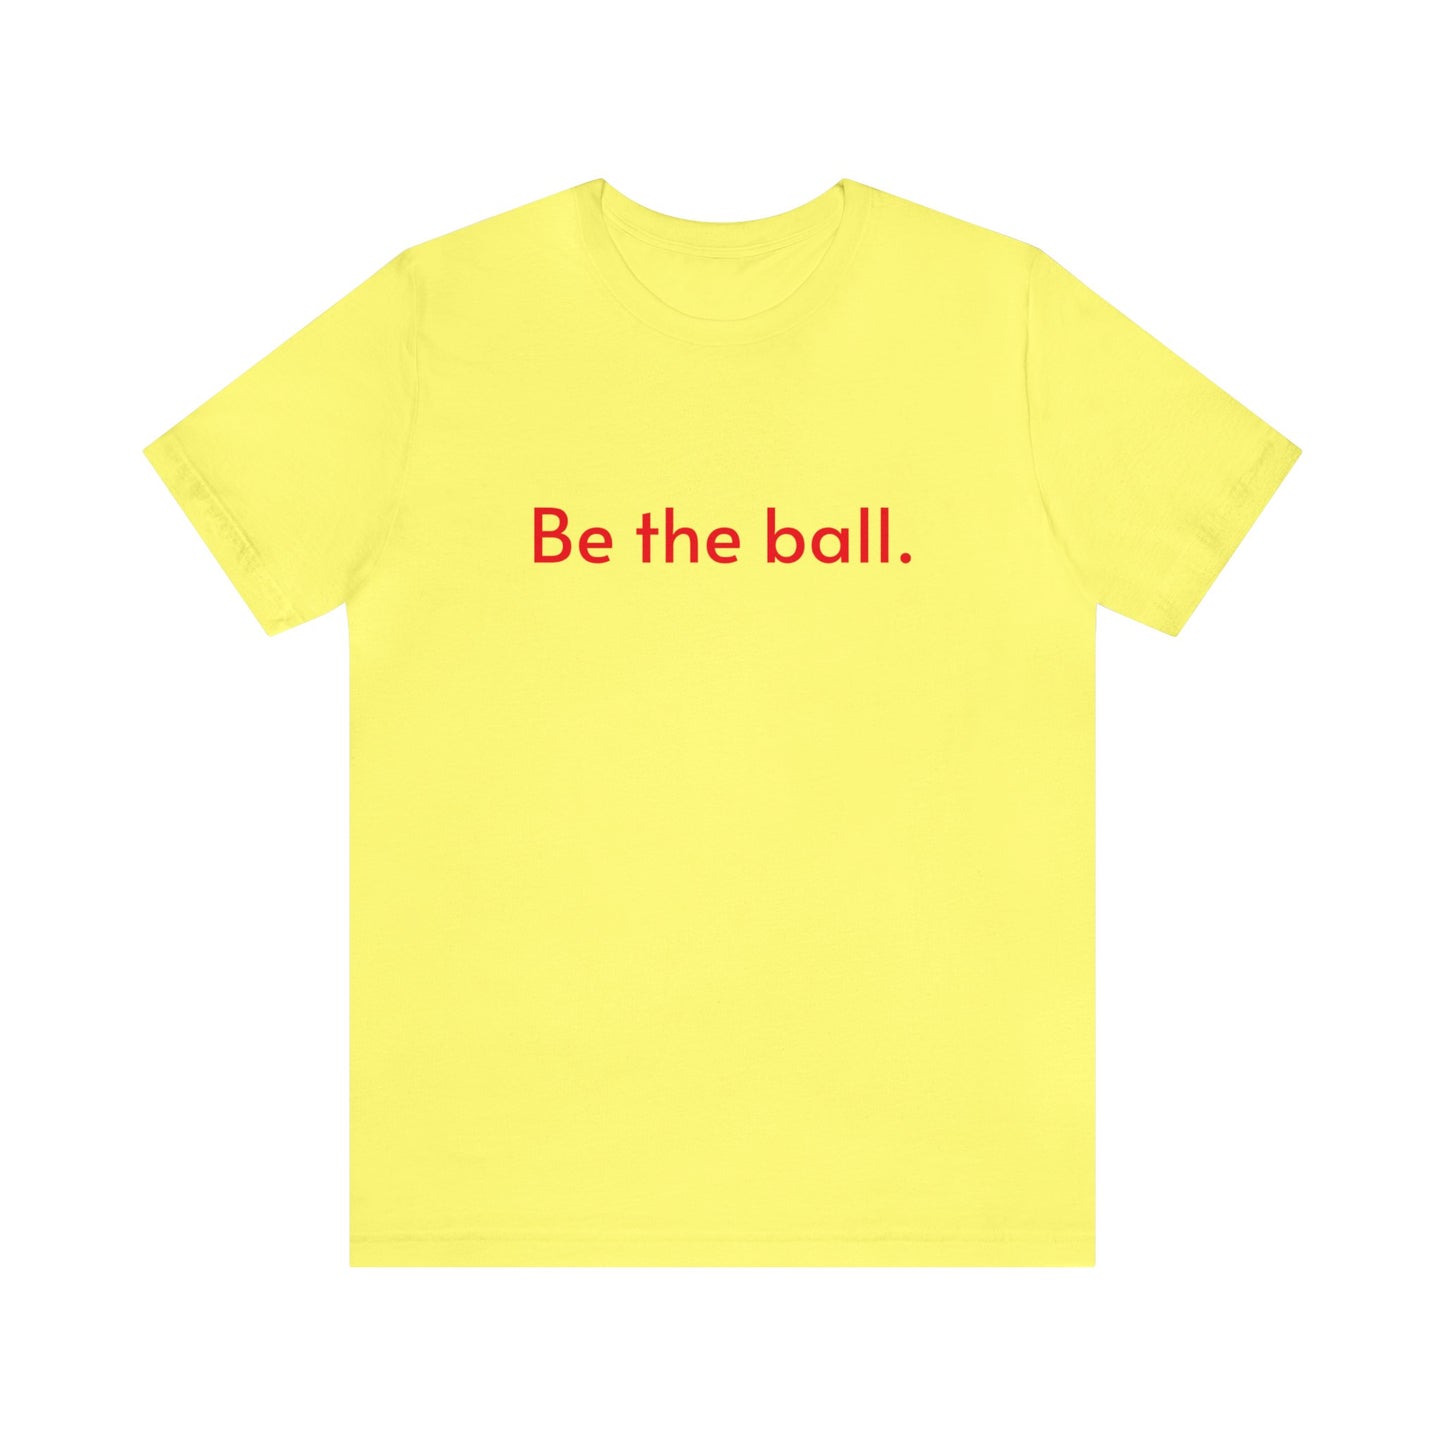 Be the ball.